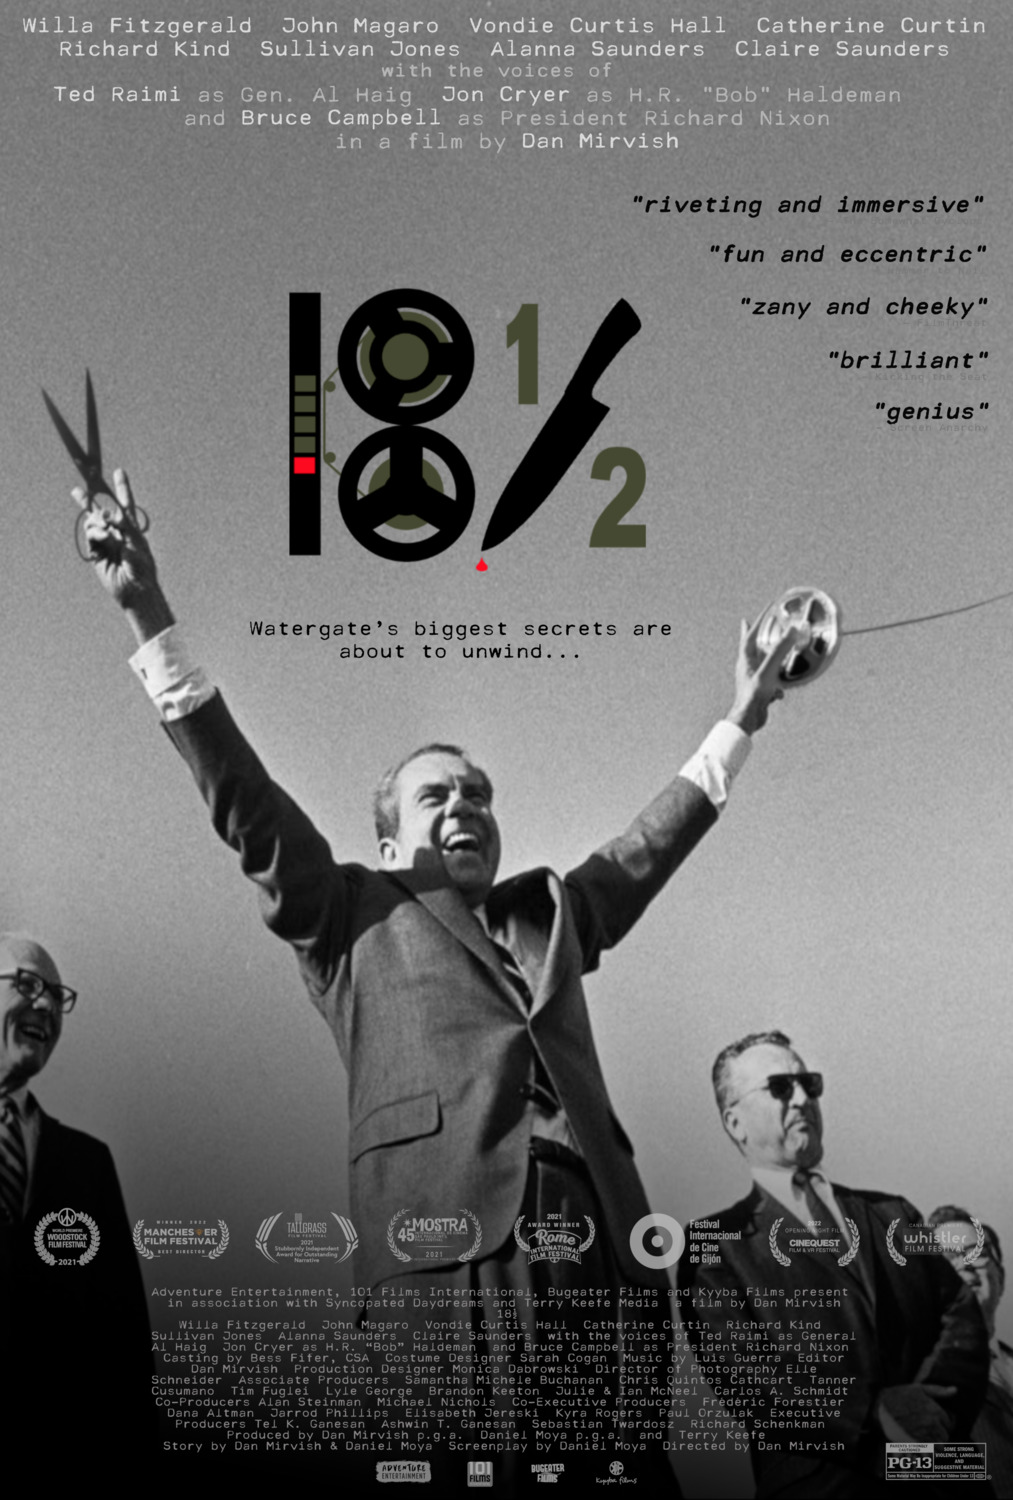 Extra Large Movie Poster Image for 18½ 